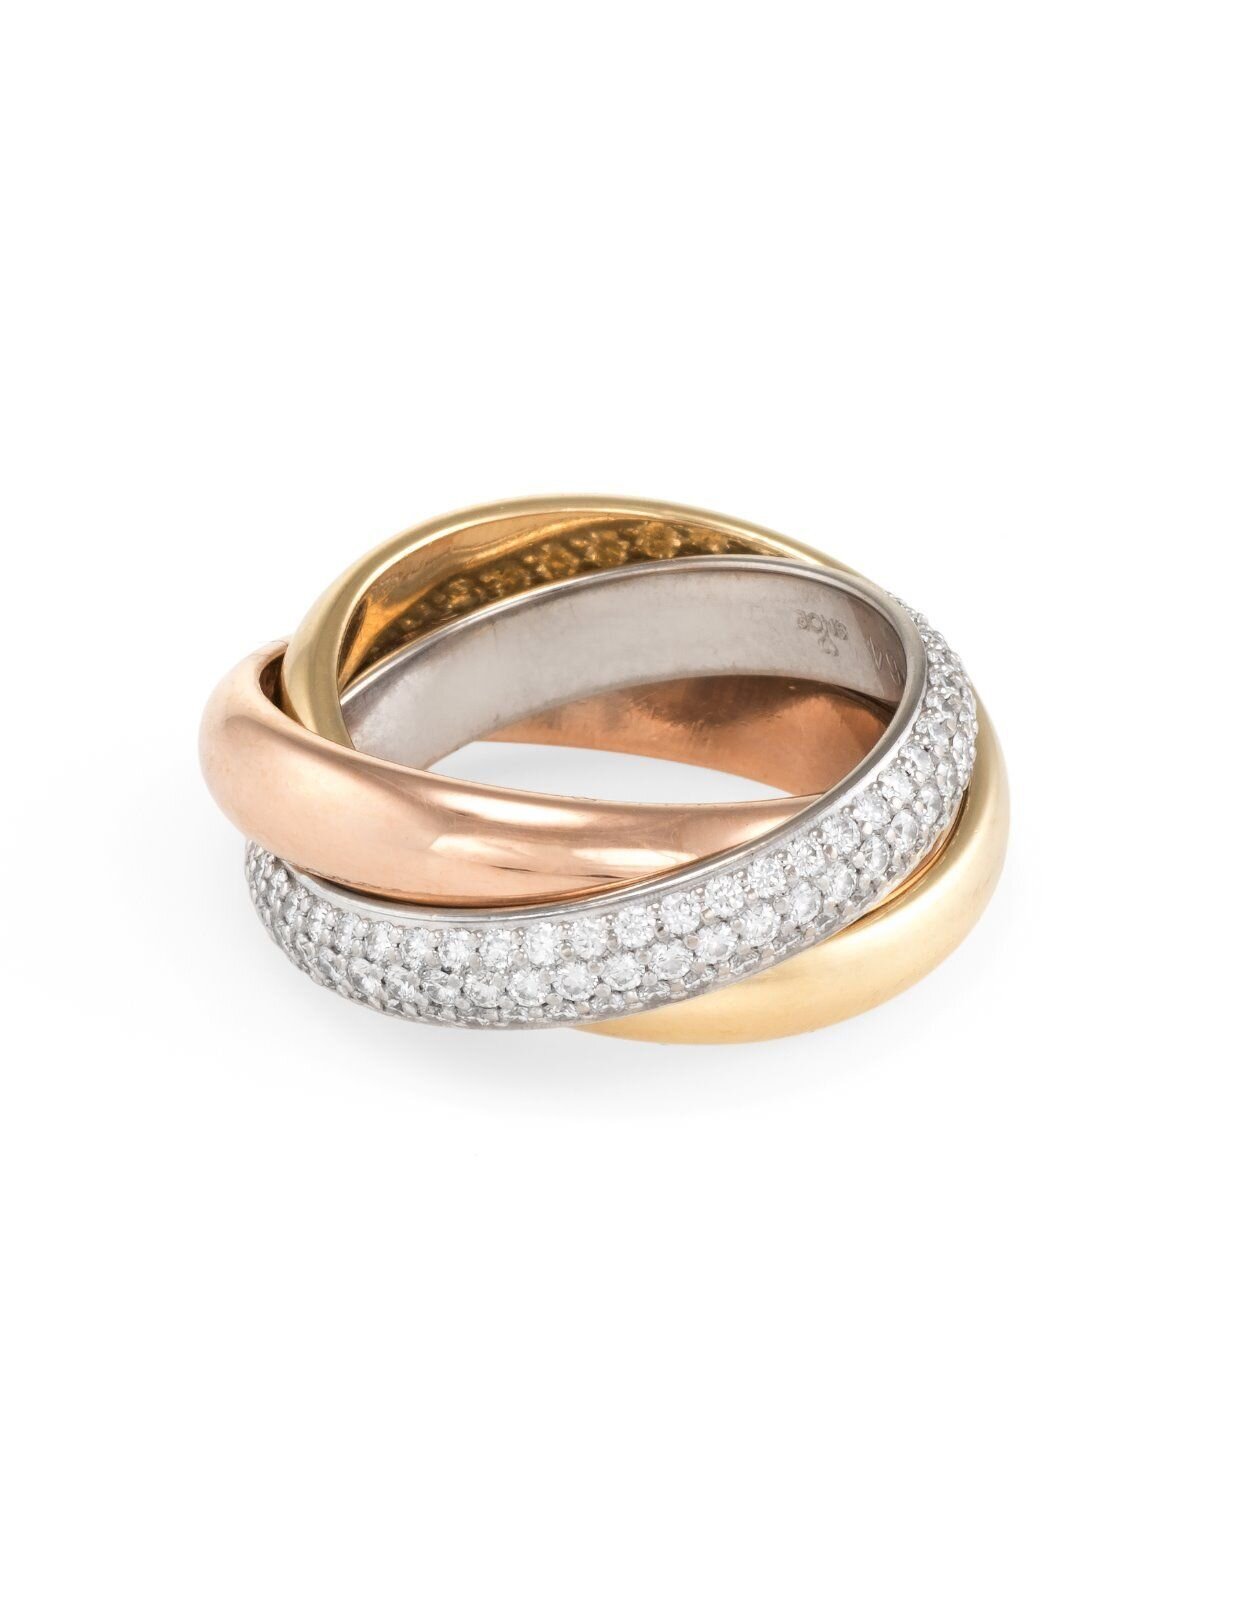 Cartier Trinity Ring in White Gold, Yellow Gold, Pink Gold & Diamonds.jpg